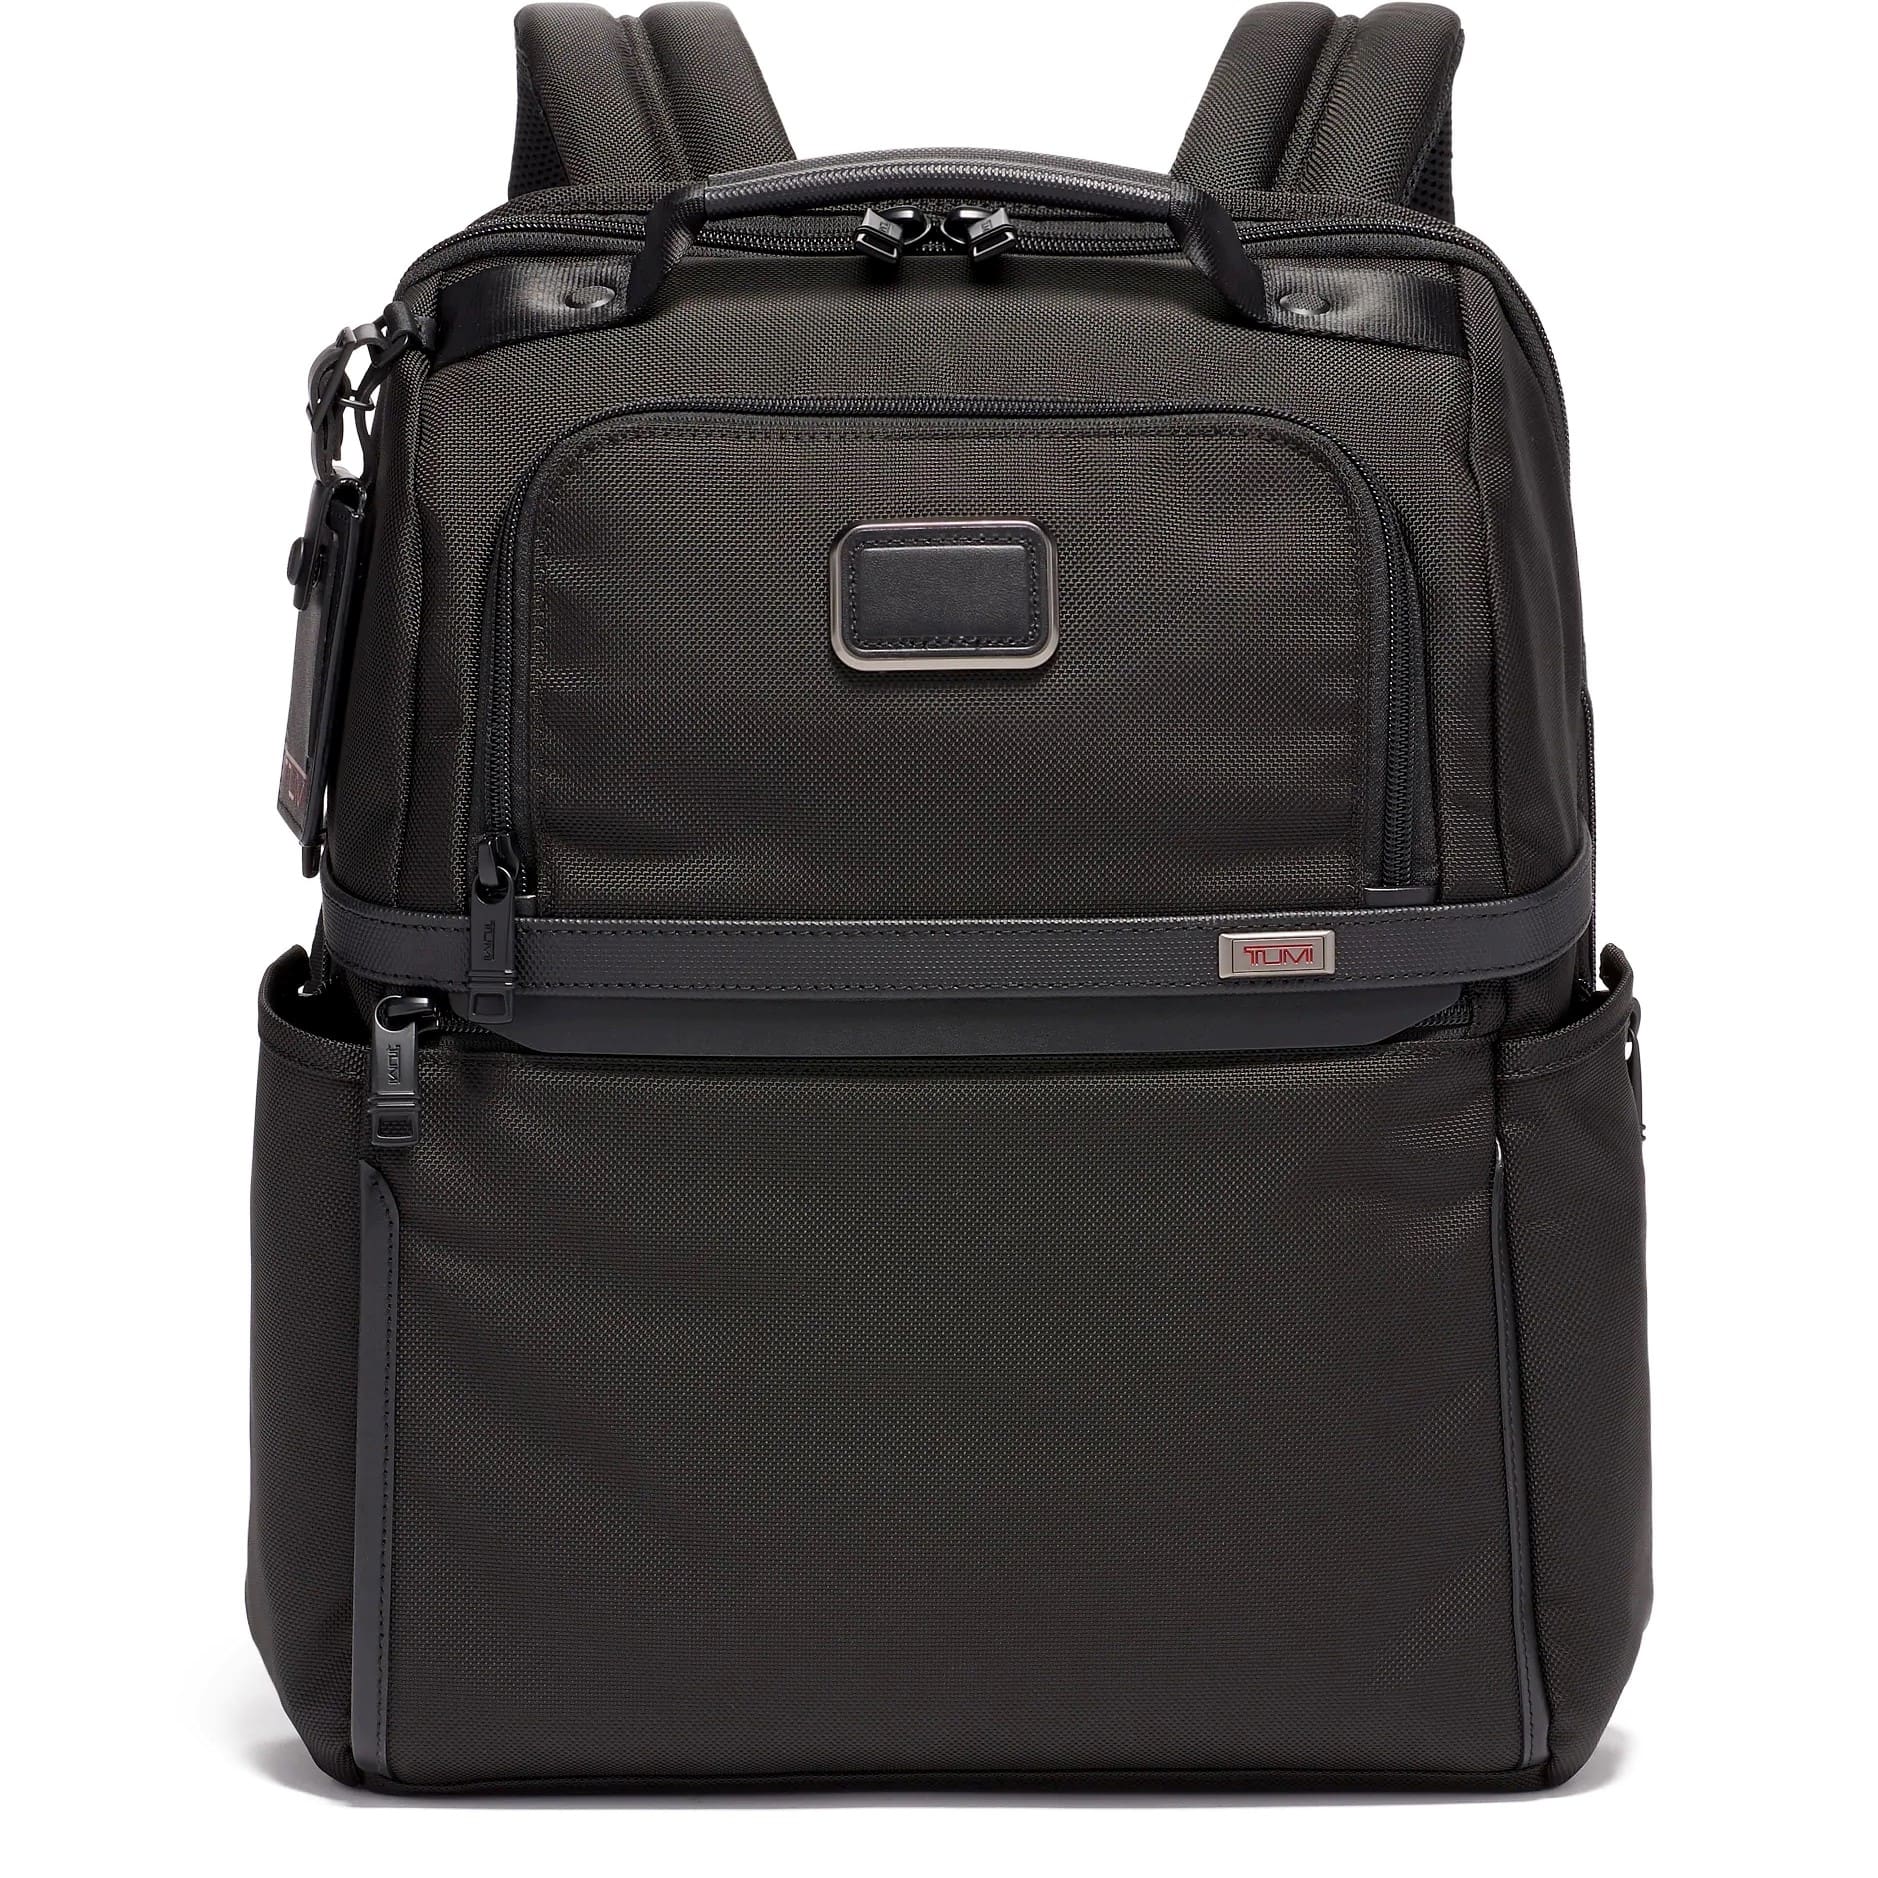 BALO LAPTOP TUMI ALPHA SLIM SOLUTIONS BRIEF PACK BACKPACK 7